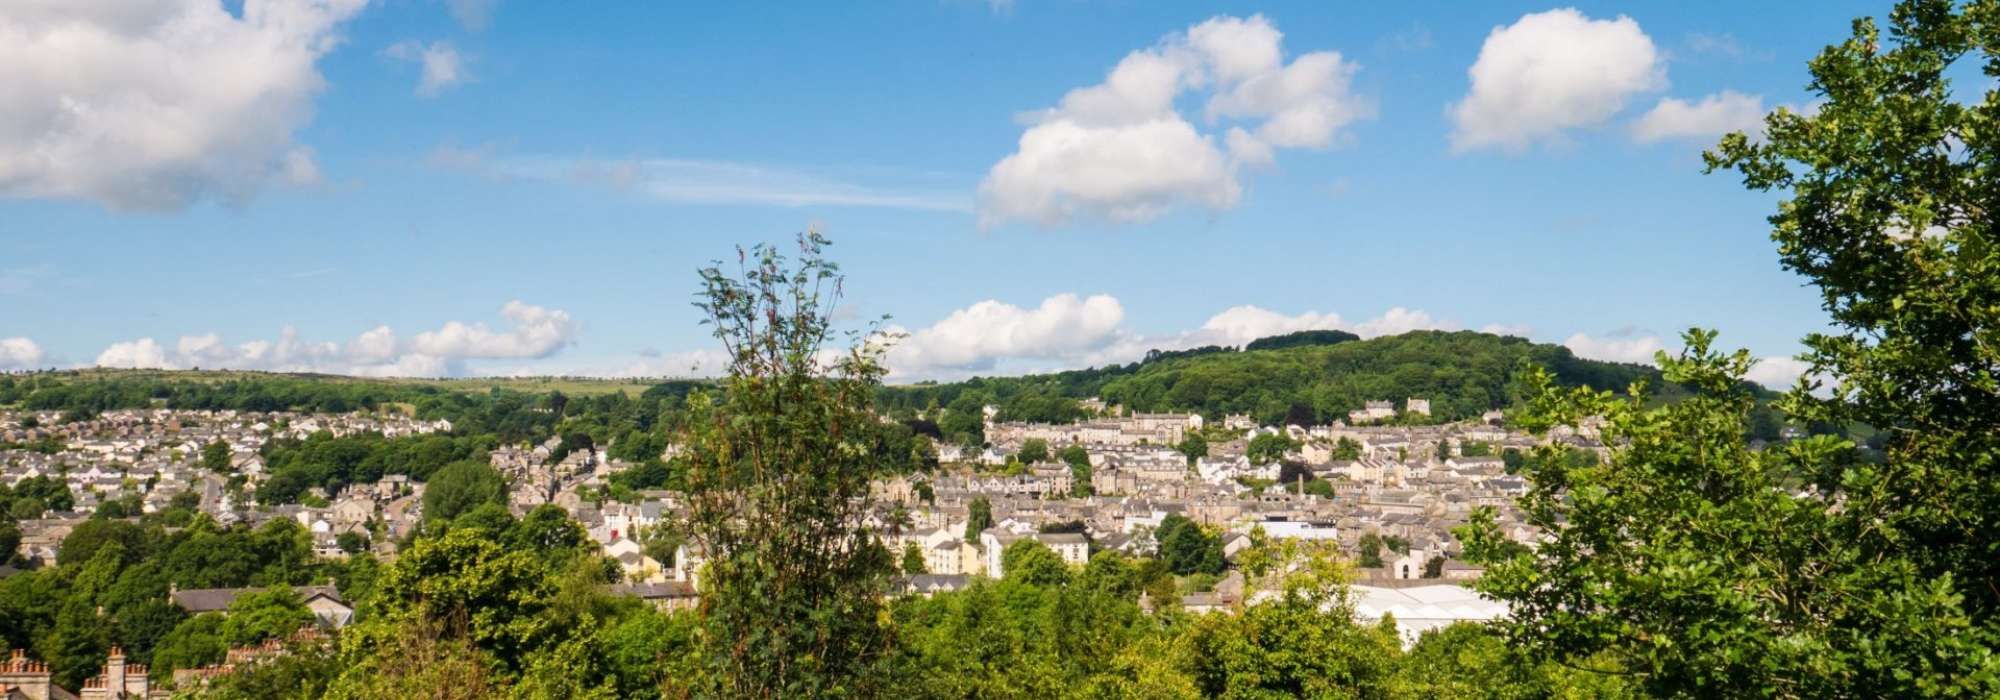 Far off shot of Kendal town from a distance, rooftops and landscape behind 